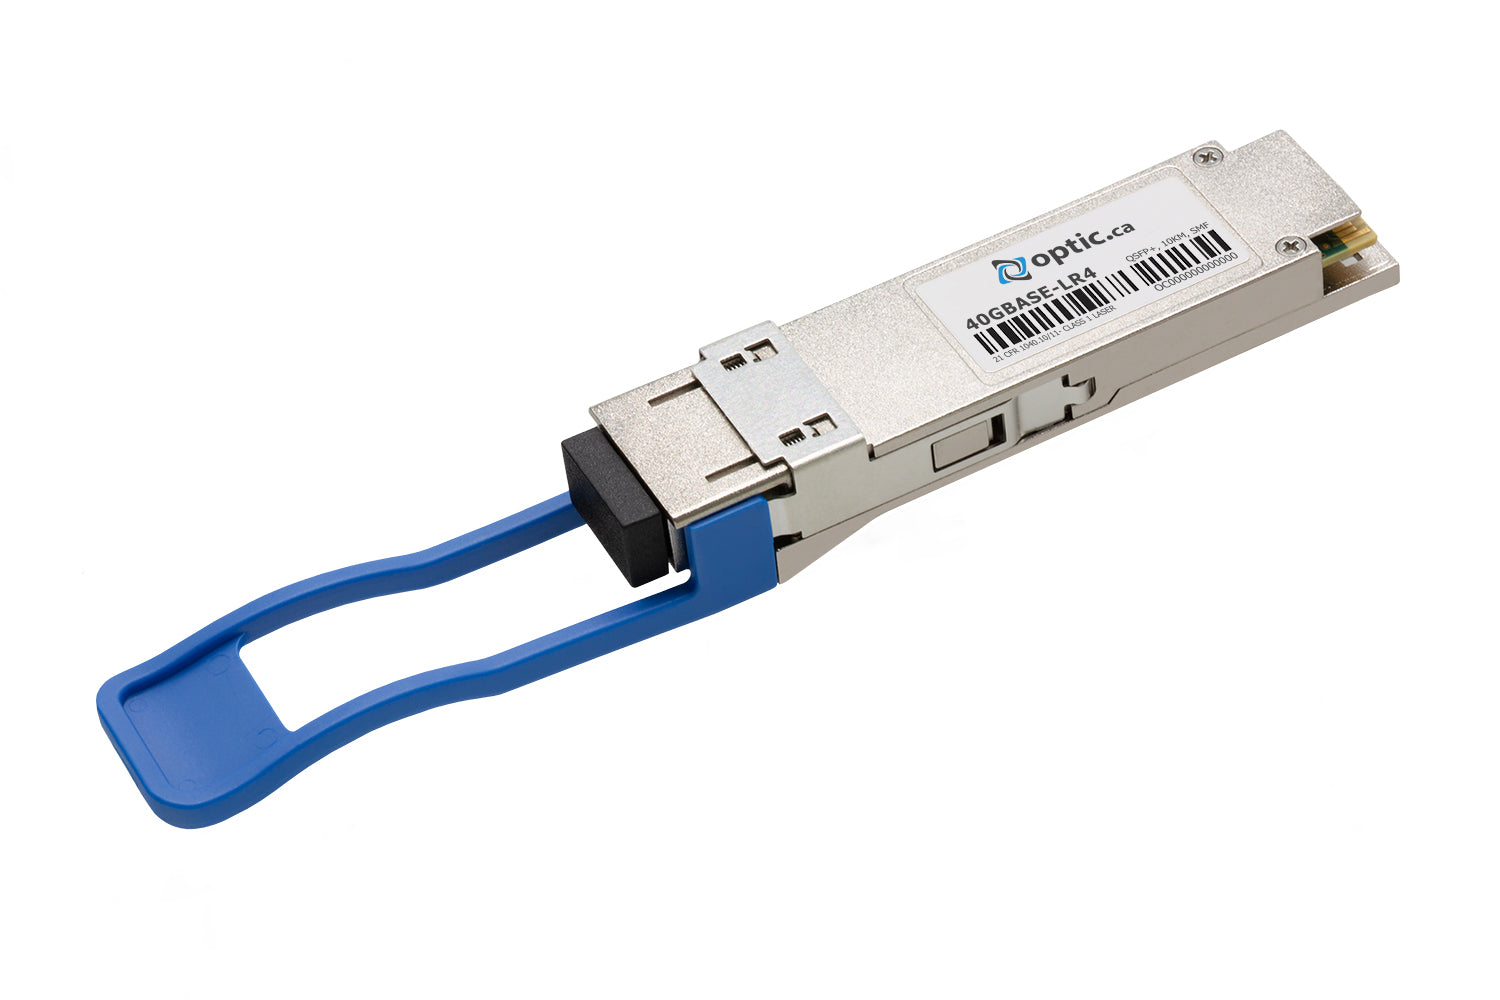 OPTIC.CA - 40GBASE-LR4 QSFP+ - QSF-503-OC - GIGAMON COMPATIBLE